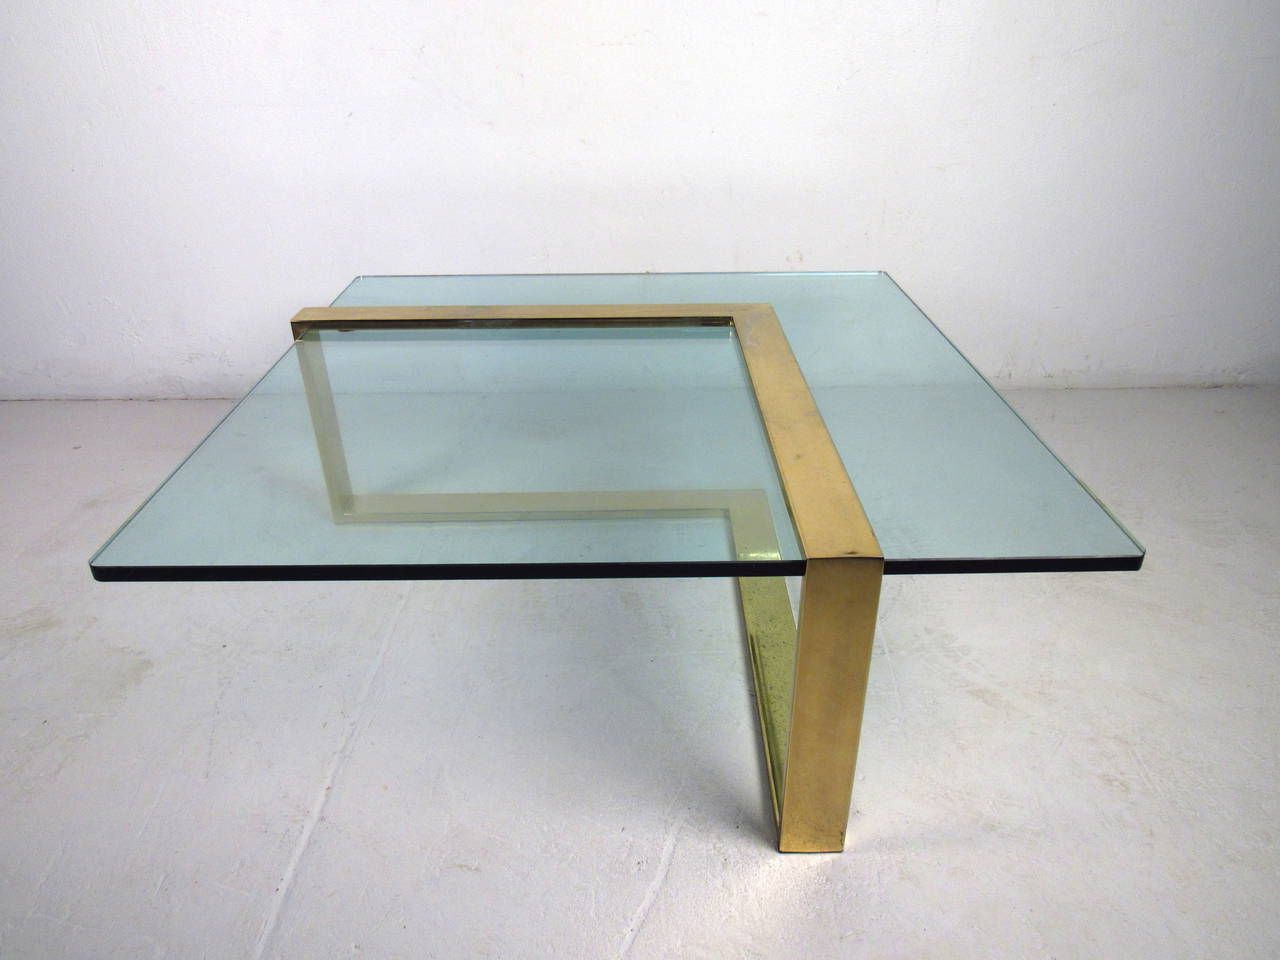 L Shaped Coffee Tables With Regard To Most Up To Date Brass L Shape Coffee Table With Glass Top At 1stdibs (View 10 of 10)